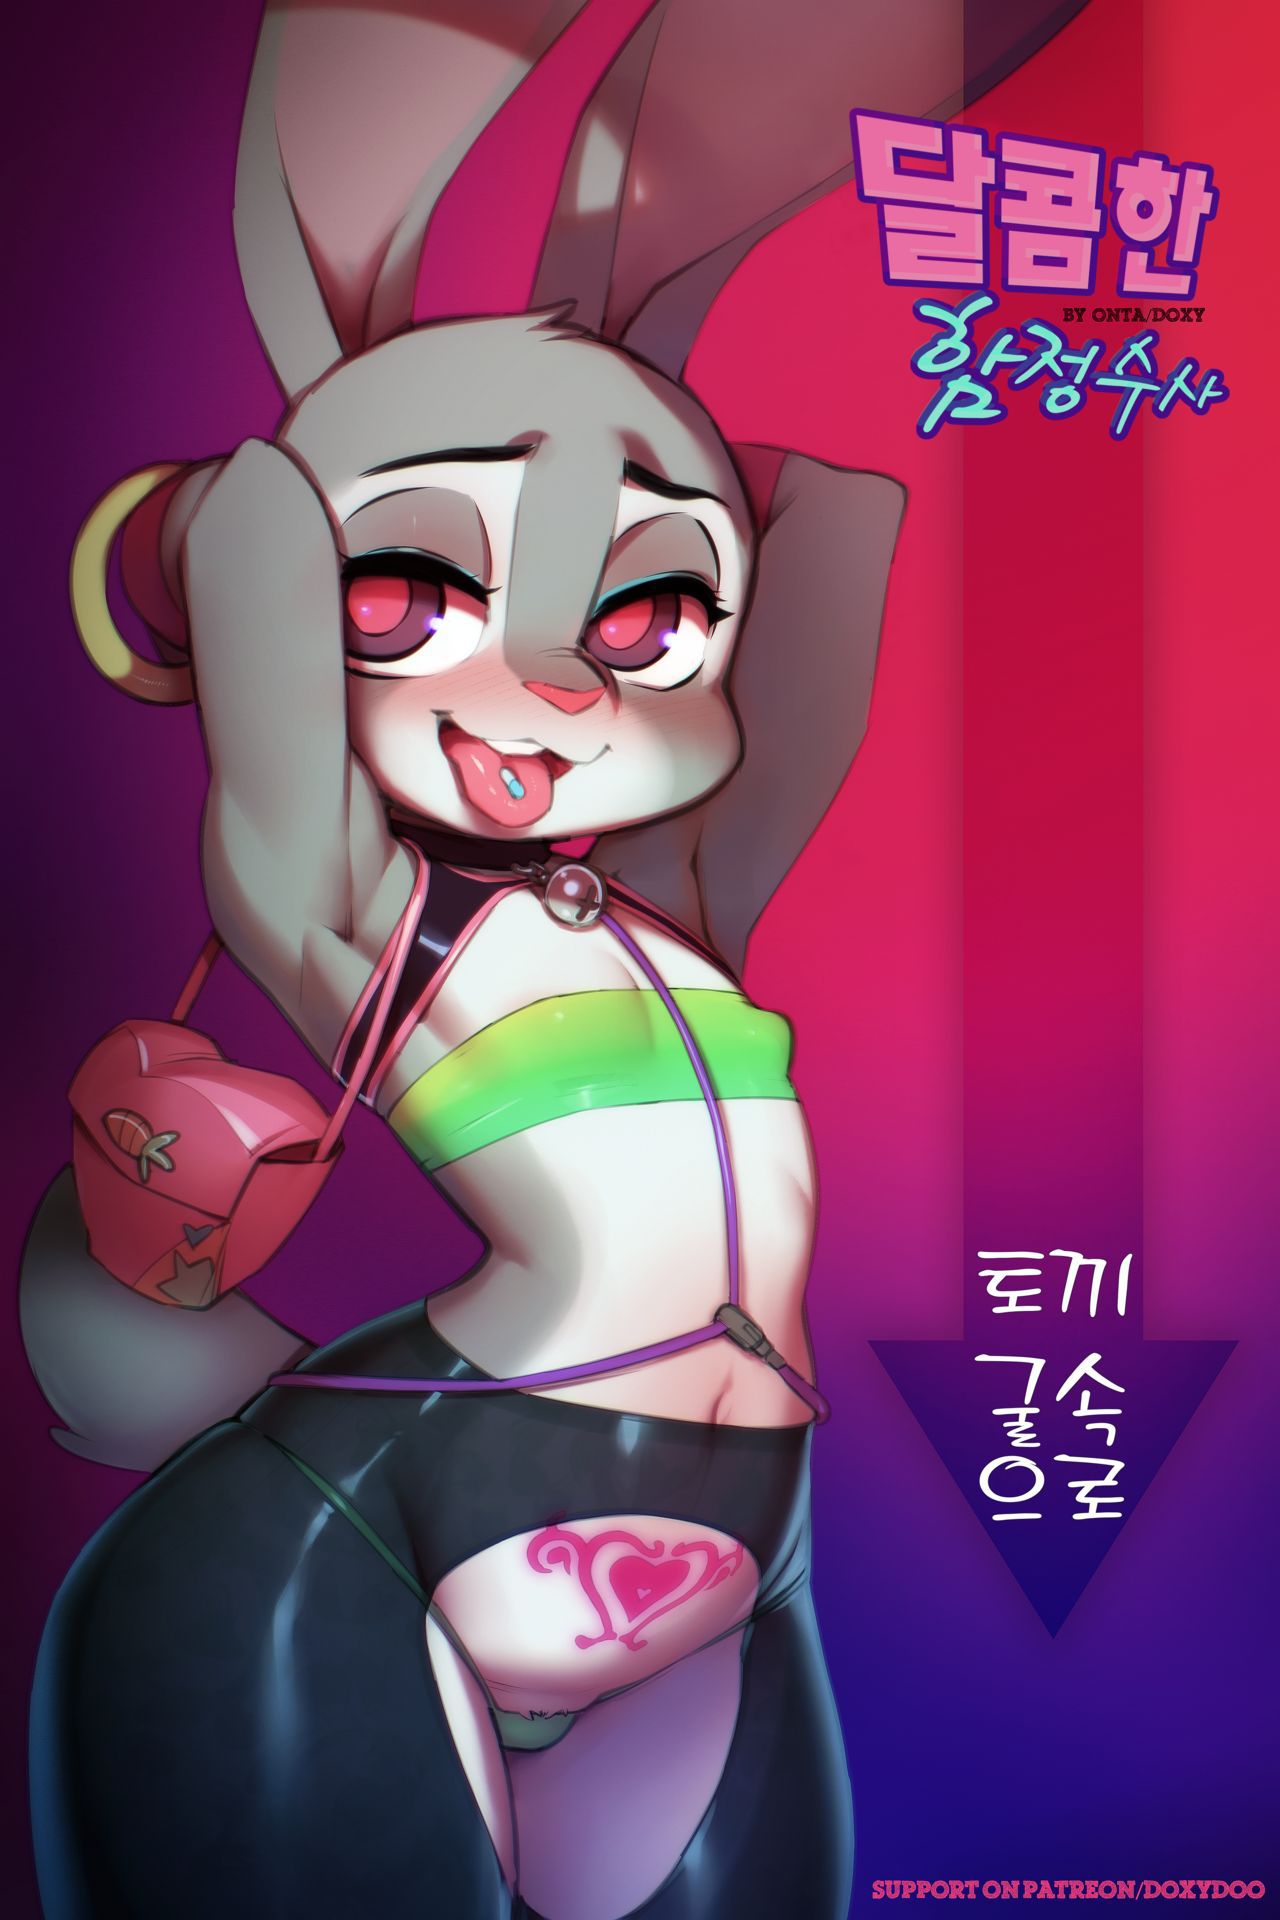 [Doxy] Sweet Sting Part 2: Down The Rabbit Hole | 달콤한 함정수사 2부: 토끼 굴속으로 (Zootopia) [Korean] [Ongoing] 1